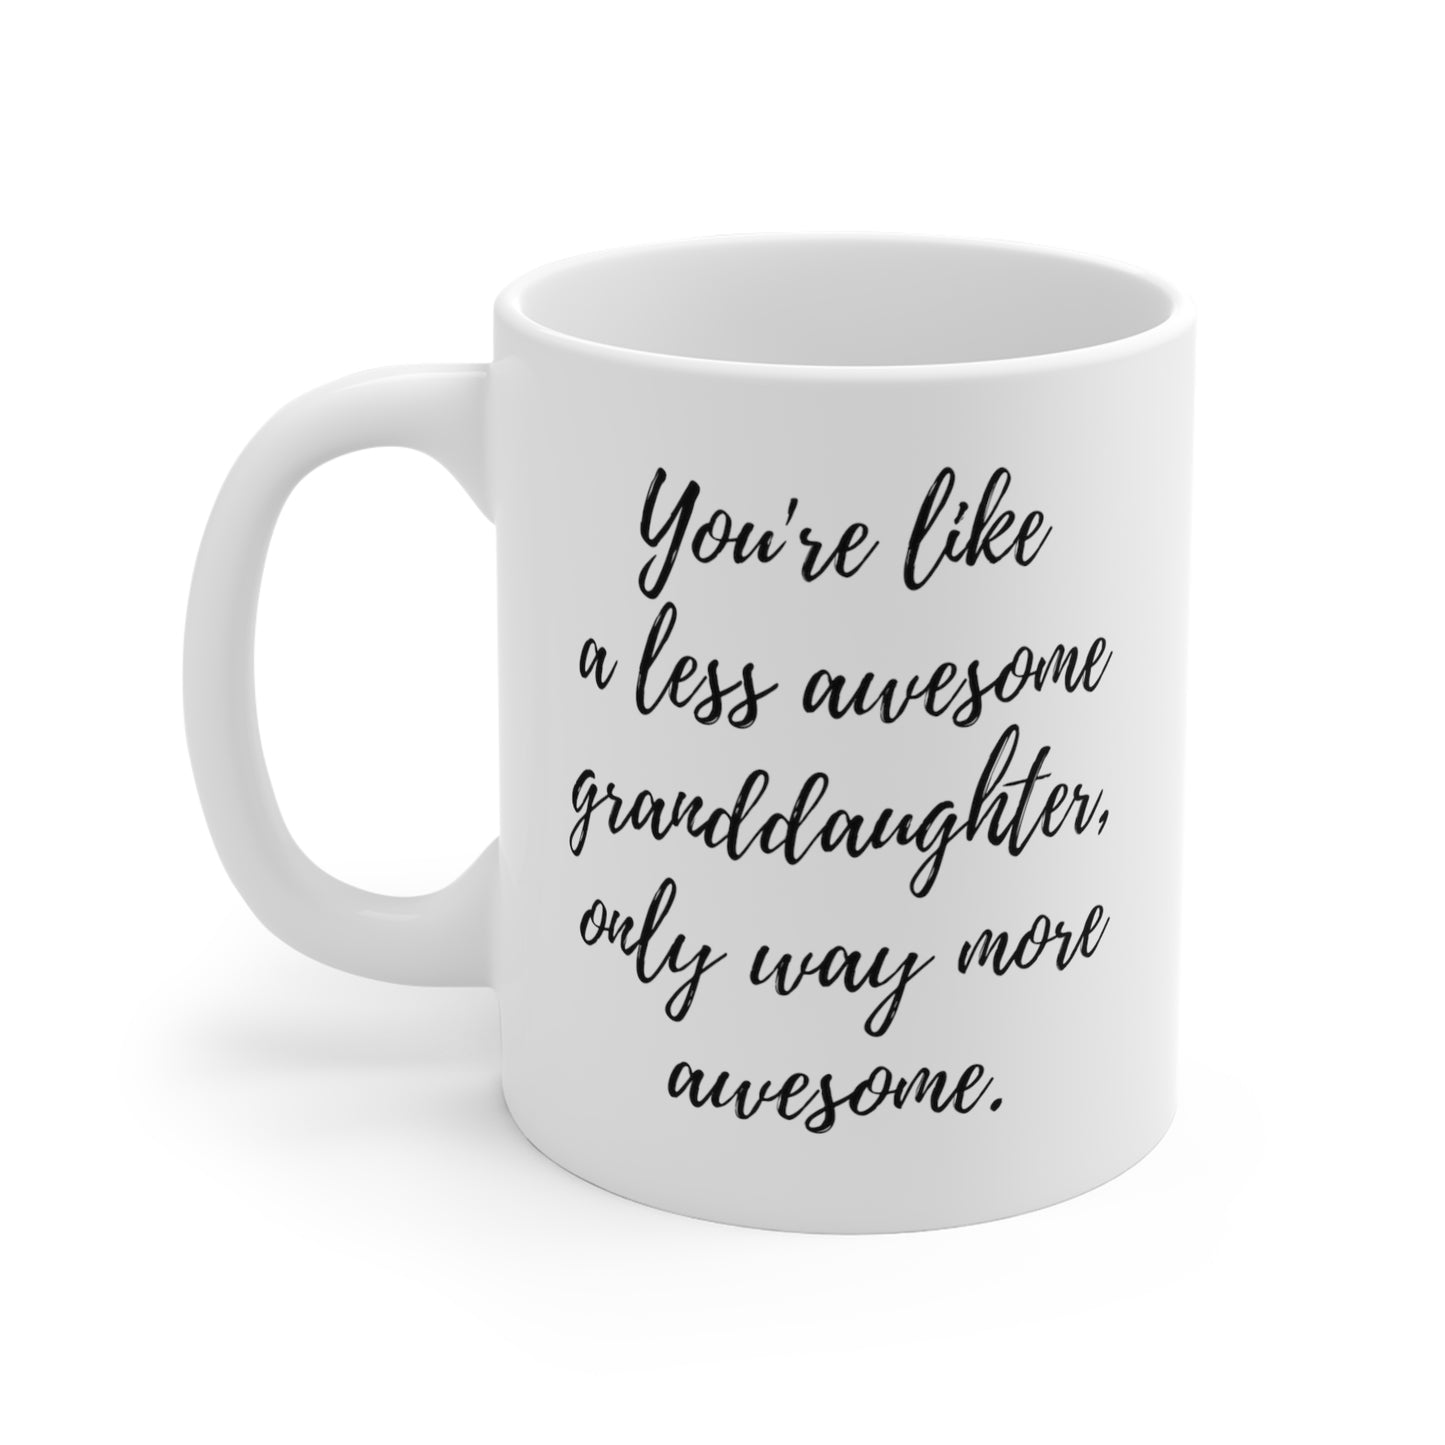 You're Like A Less Awesome Granddaughter, Only Way More Awesome | Funny, Snarky Gift | White Ceramic Mug, Script Font